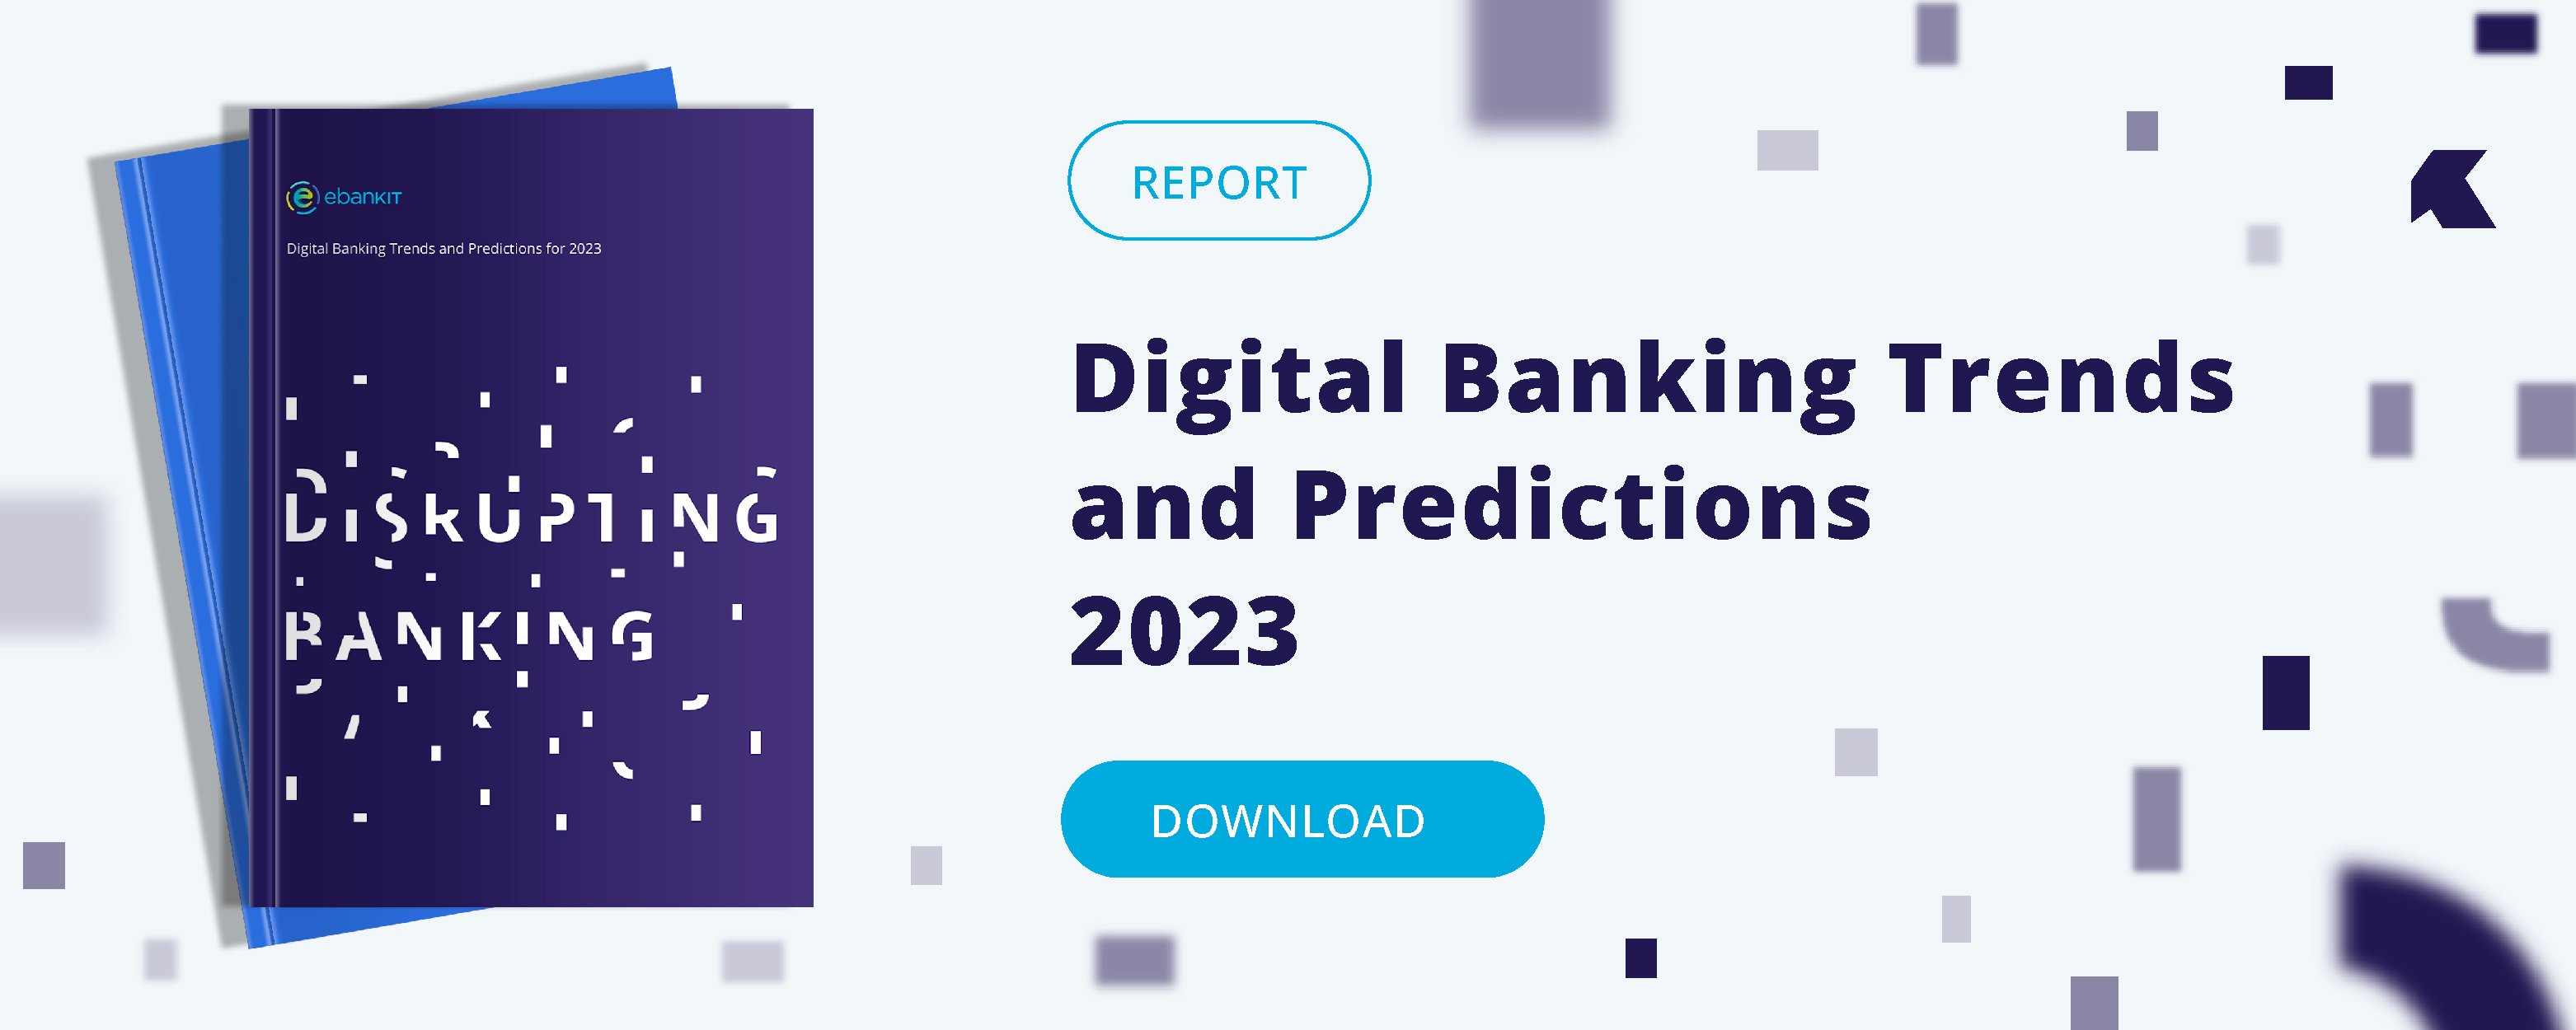 trends and prediction report banner from omnichannel banking platforms